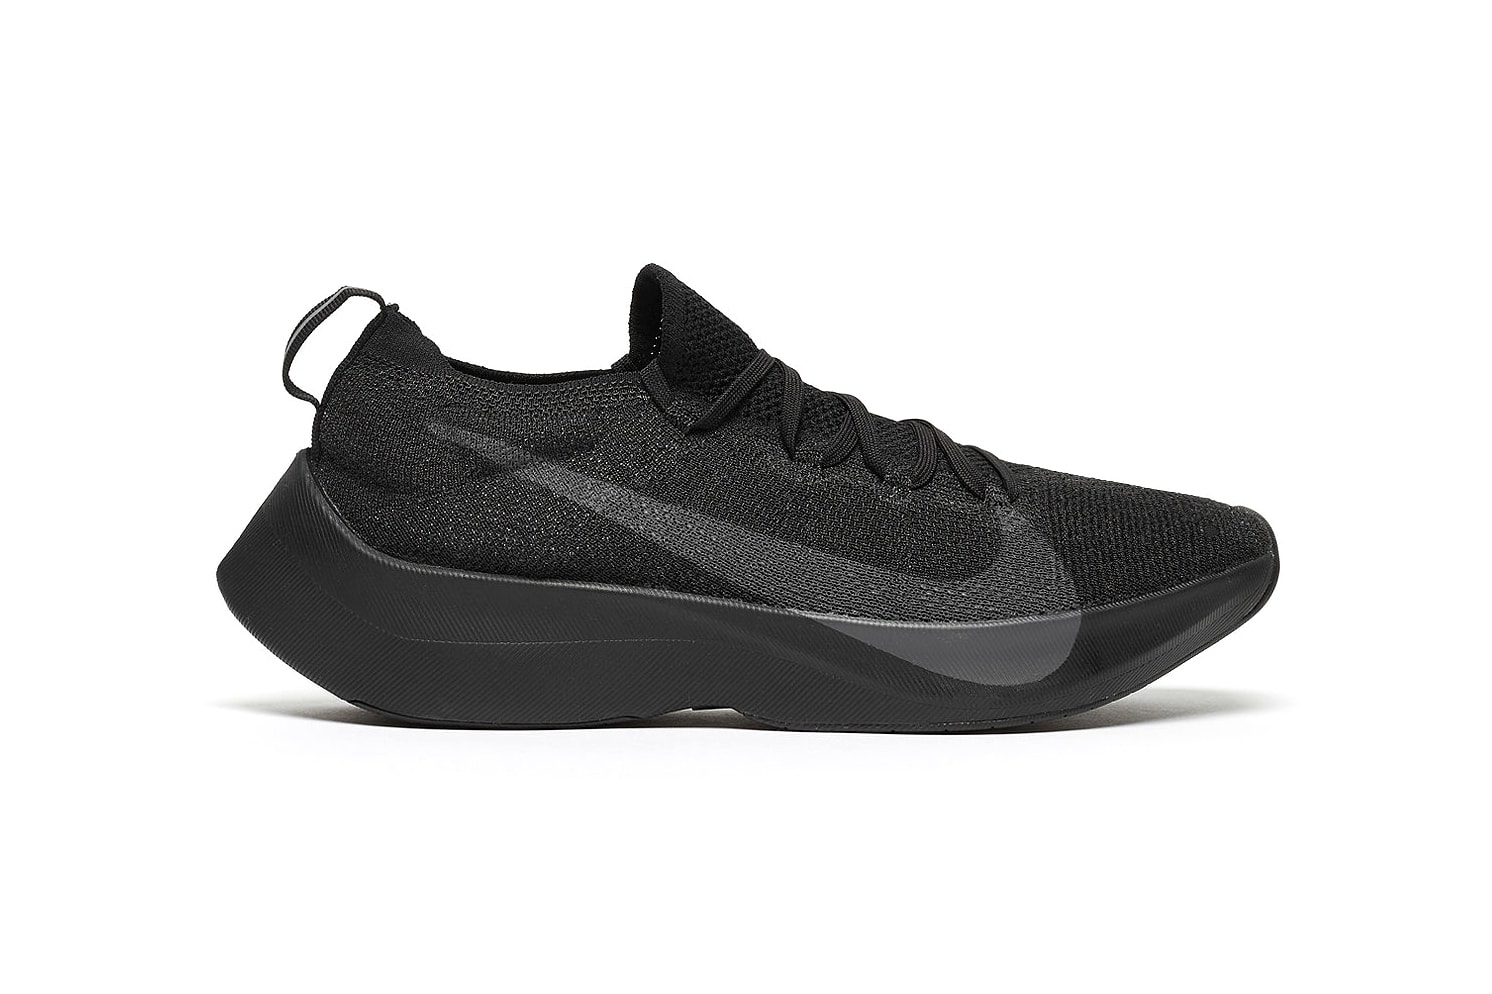 Nike React Vaporfly Elite Triple Black 2018 february 23 release date info sneakers shoes footwear anthracite AQ1763 001